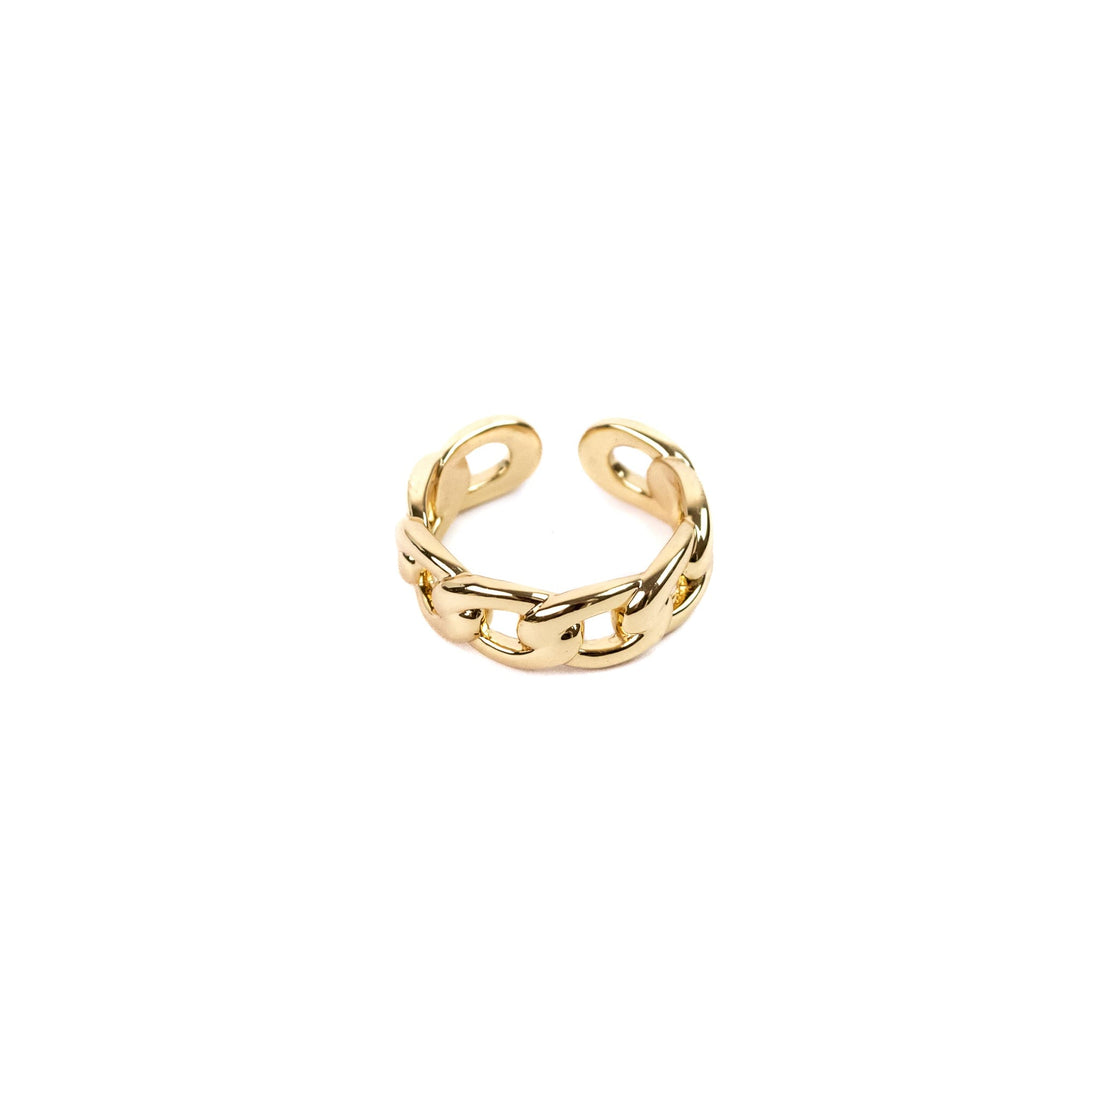 Enamel and Gold Plated Adjustable Ring Rings Sayulita Sol Gold Plated 